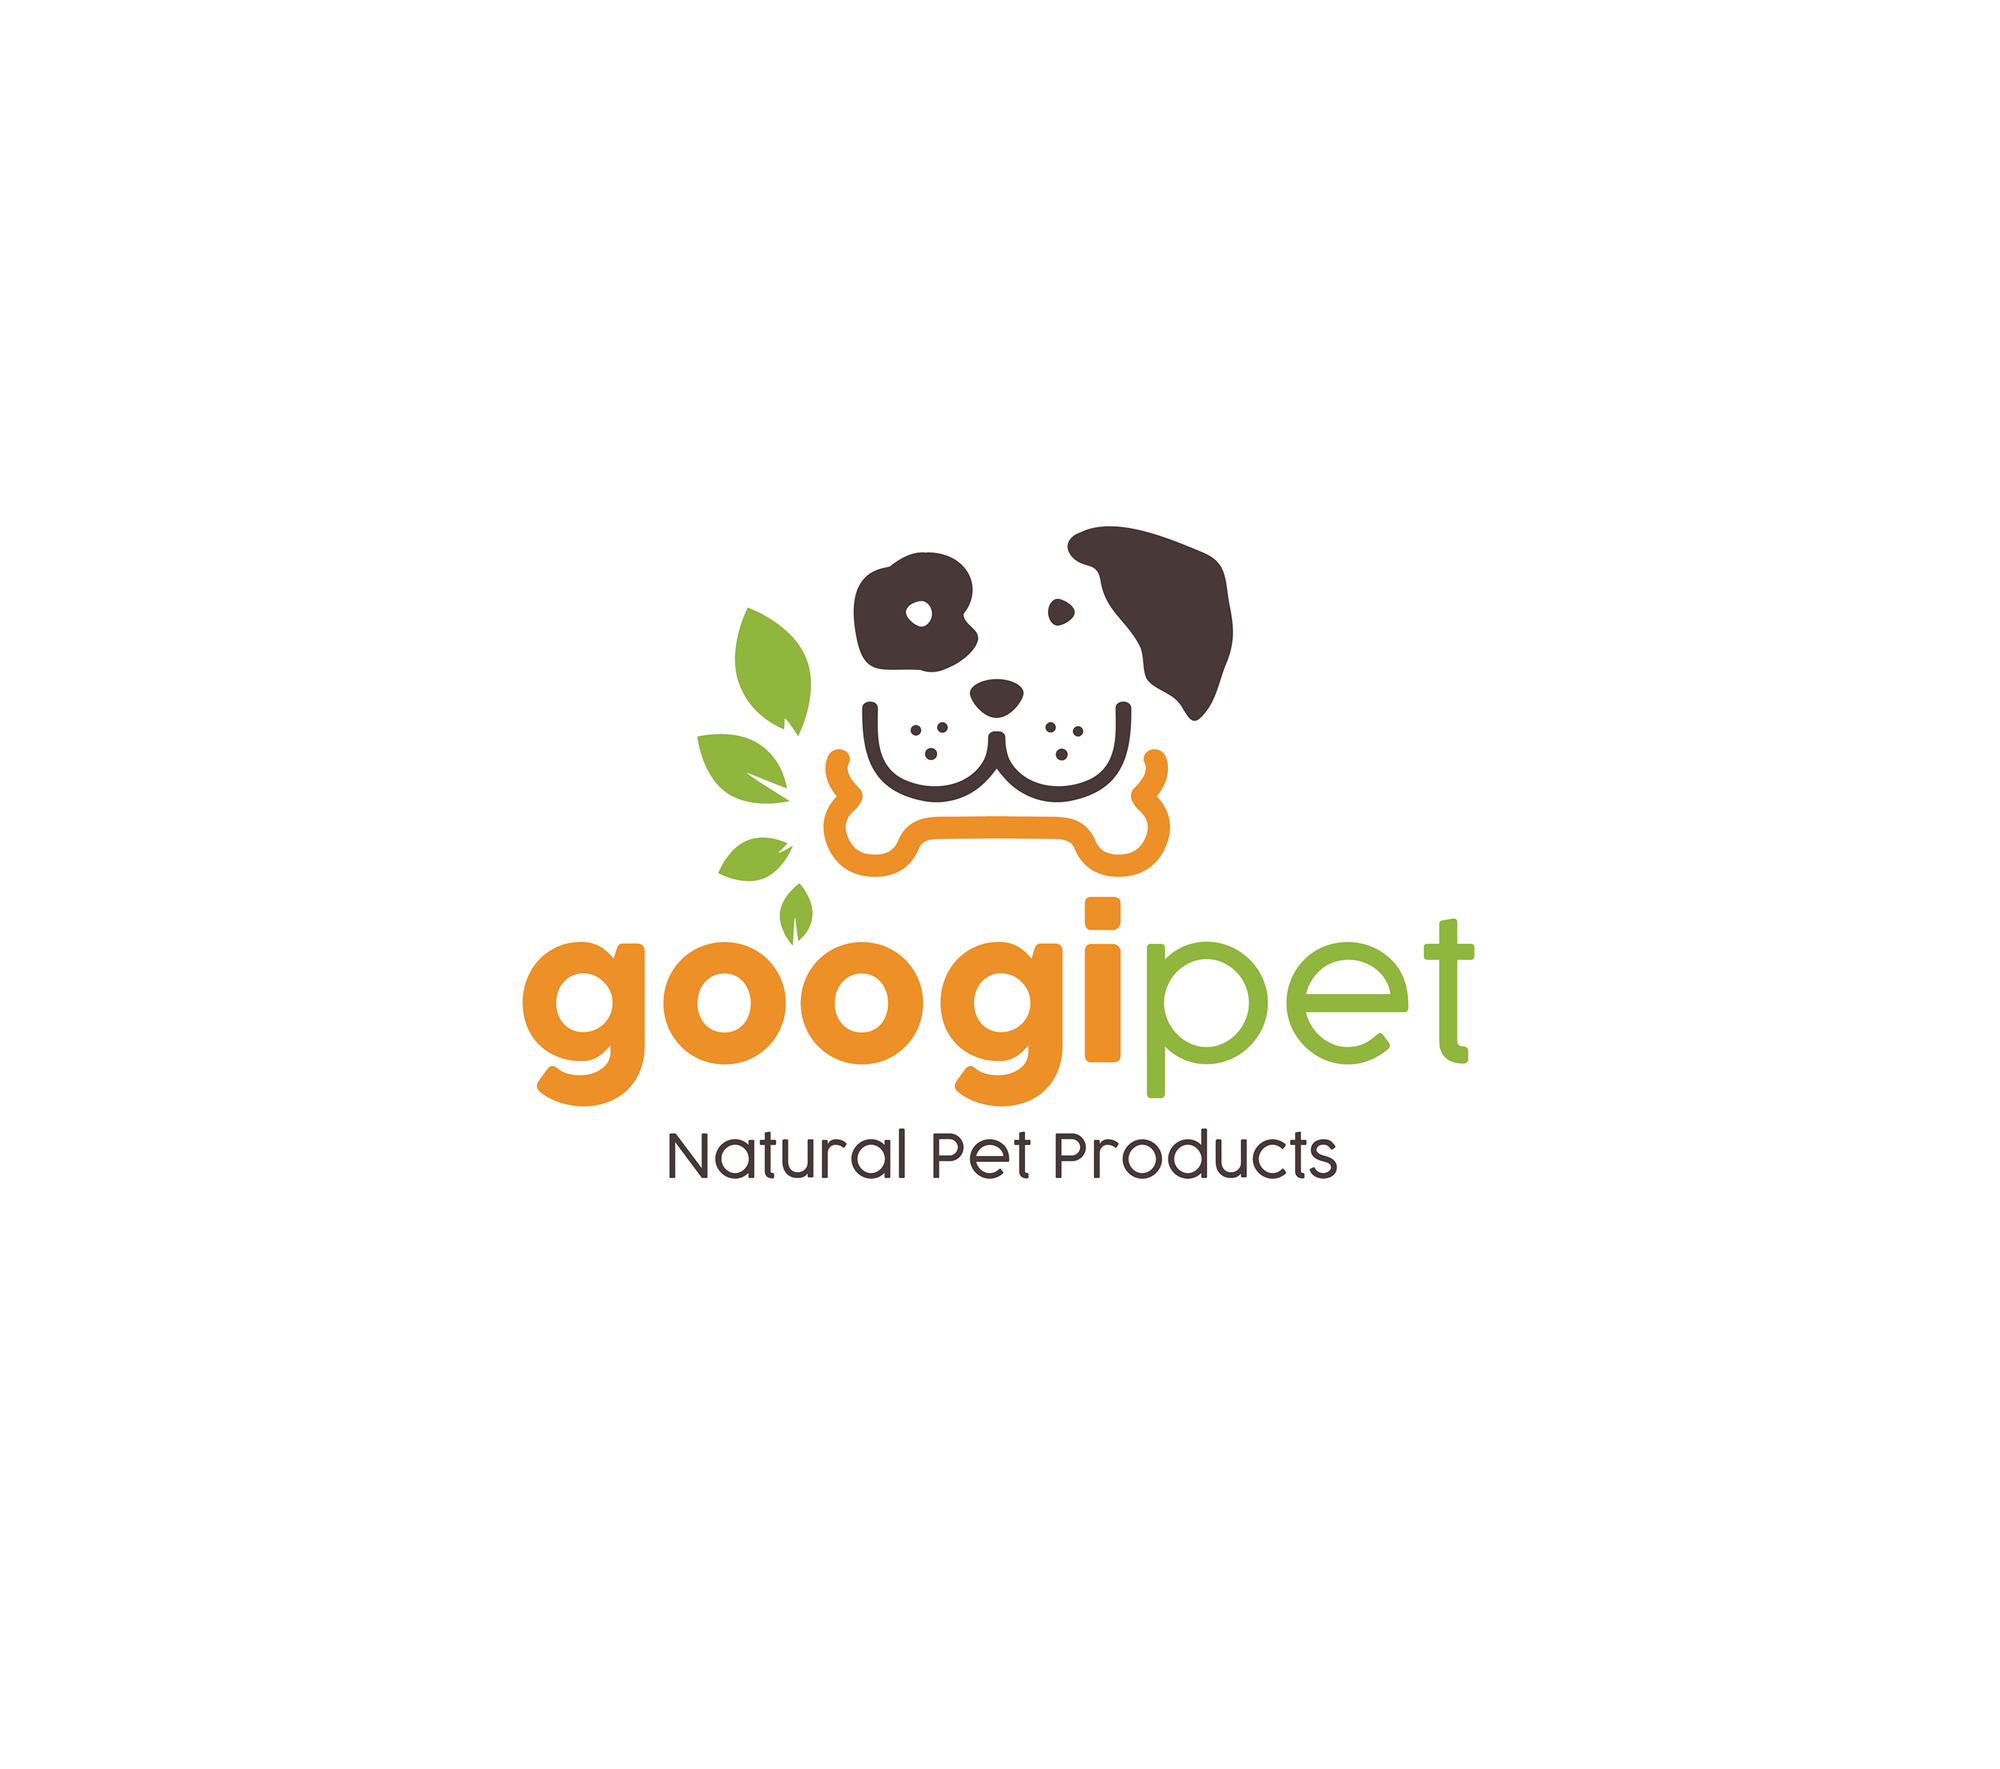 Innovative and Sustainable - Googipet Natural Pet Company